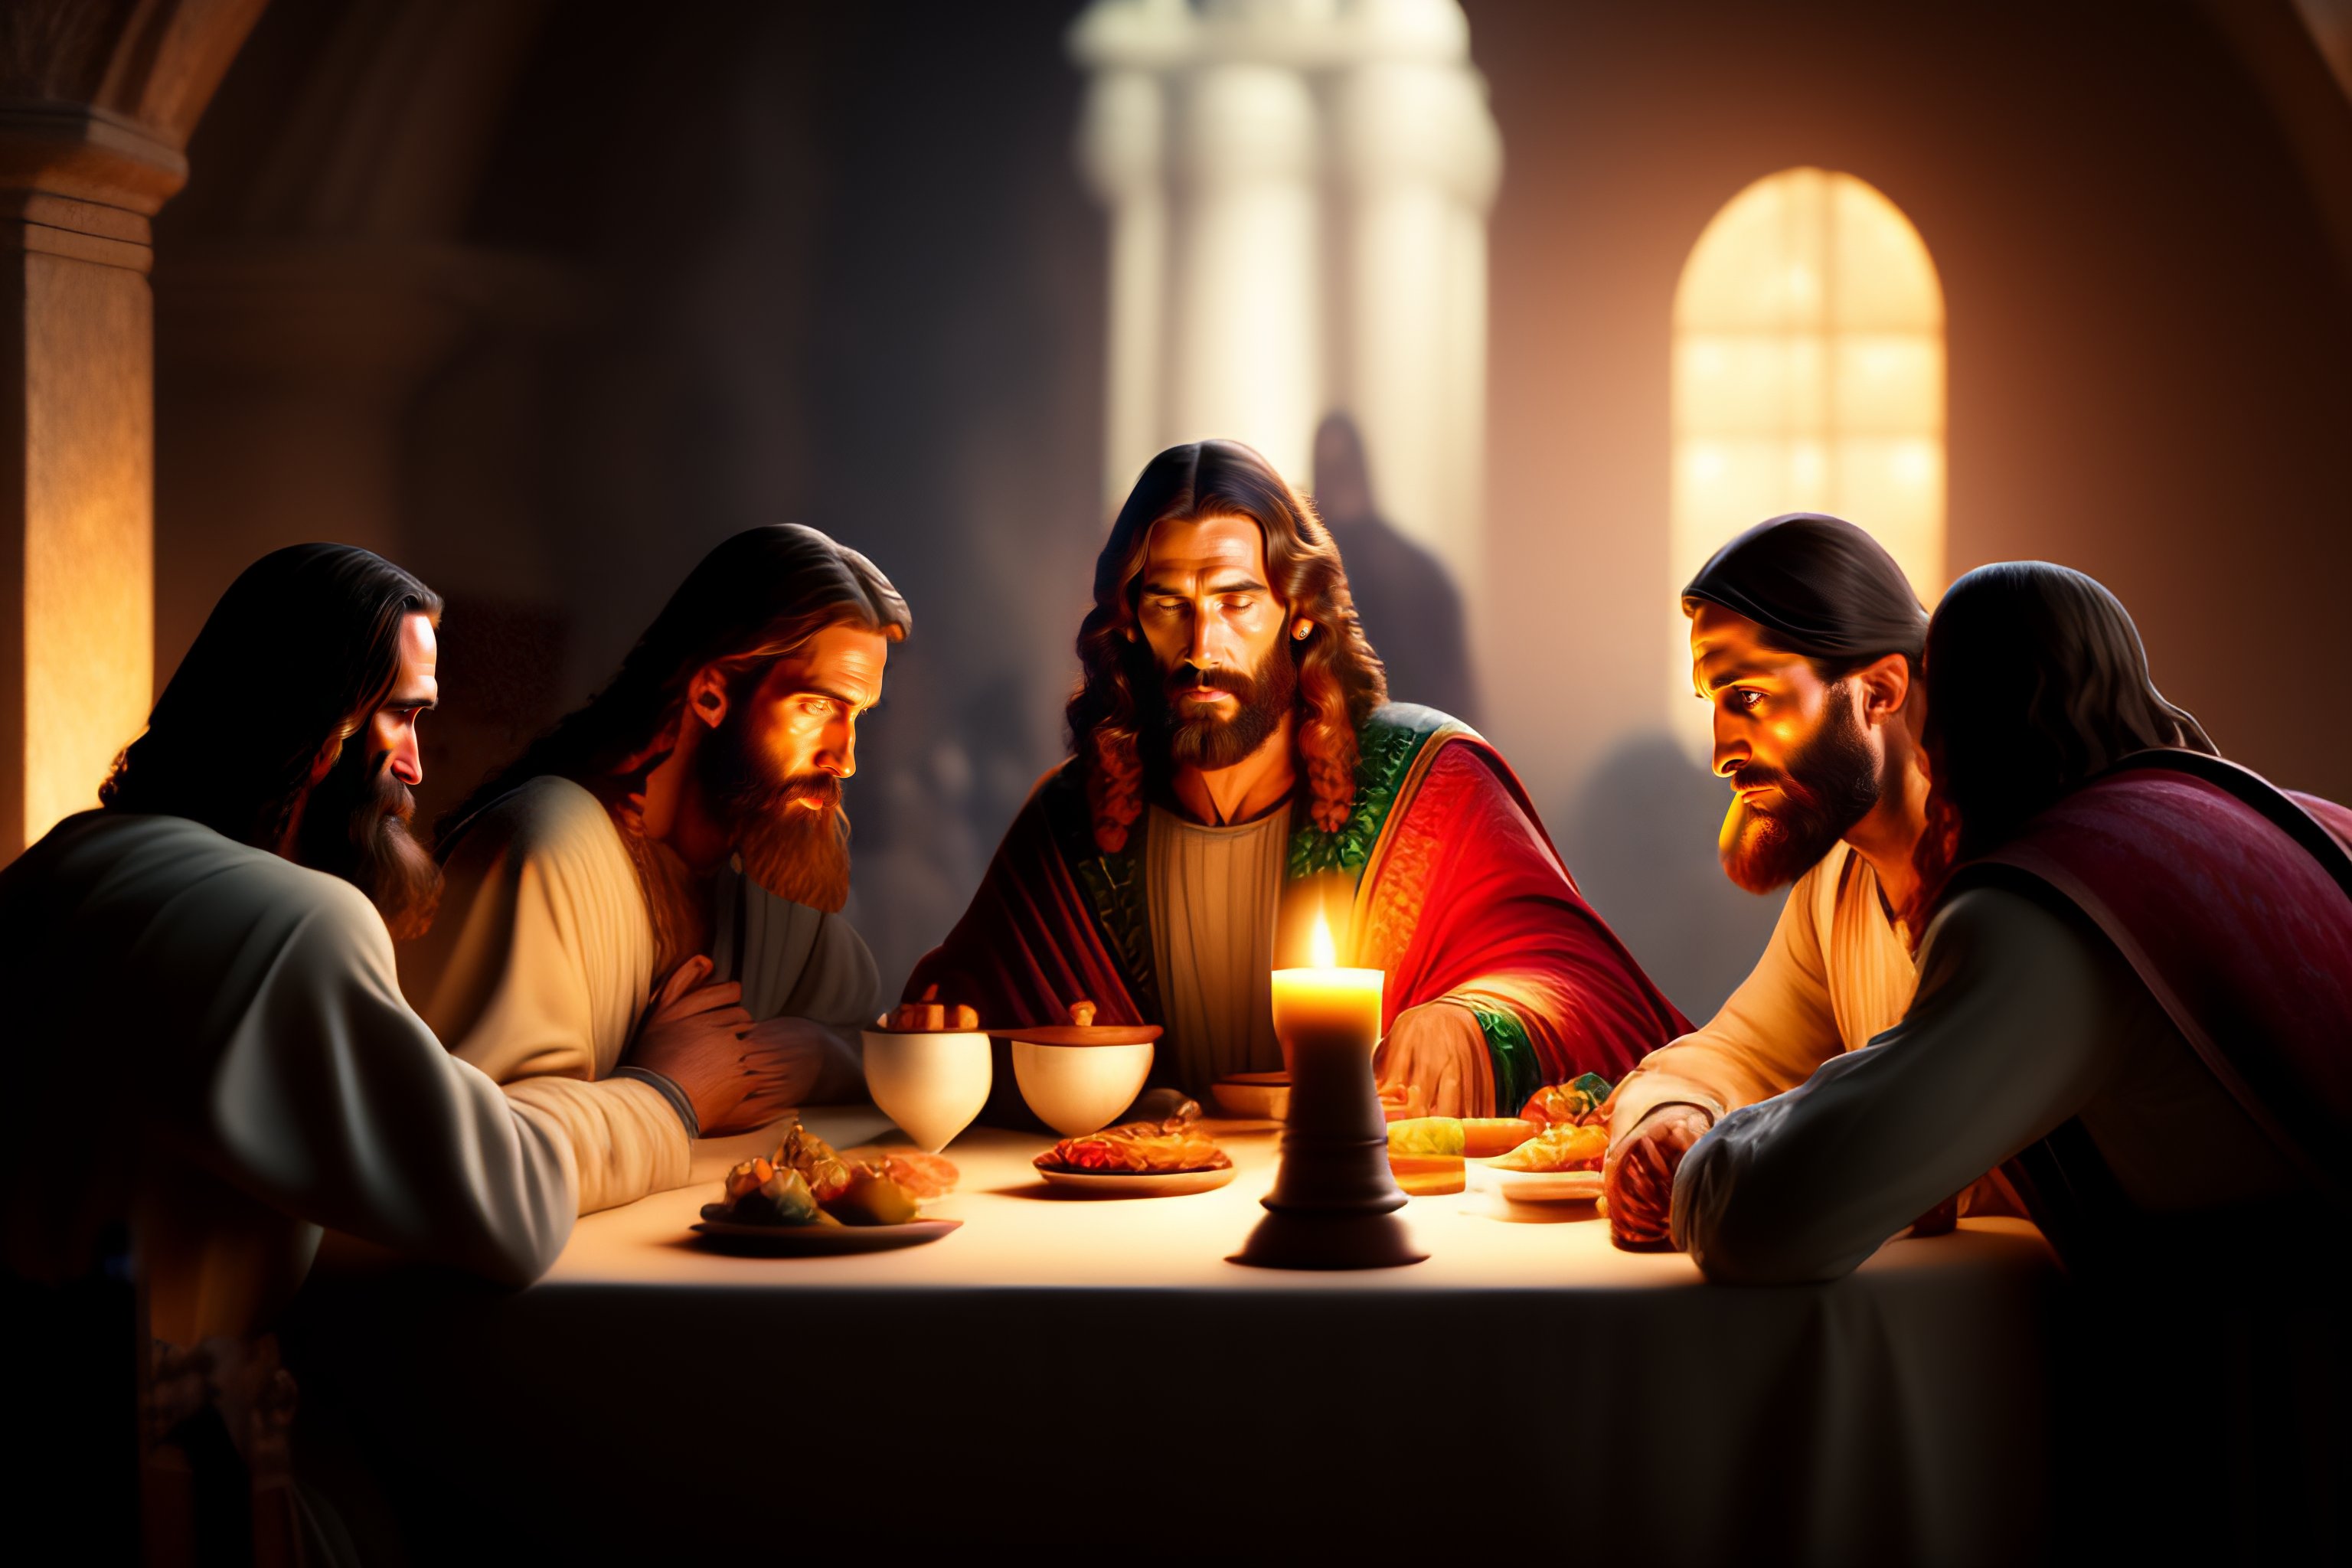 Lexica - Hyper realistic color photo of the last supper, year 1, jesus ...